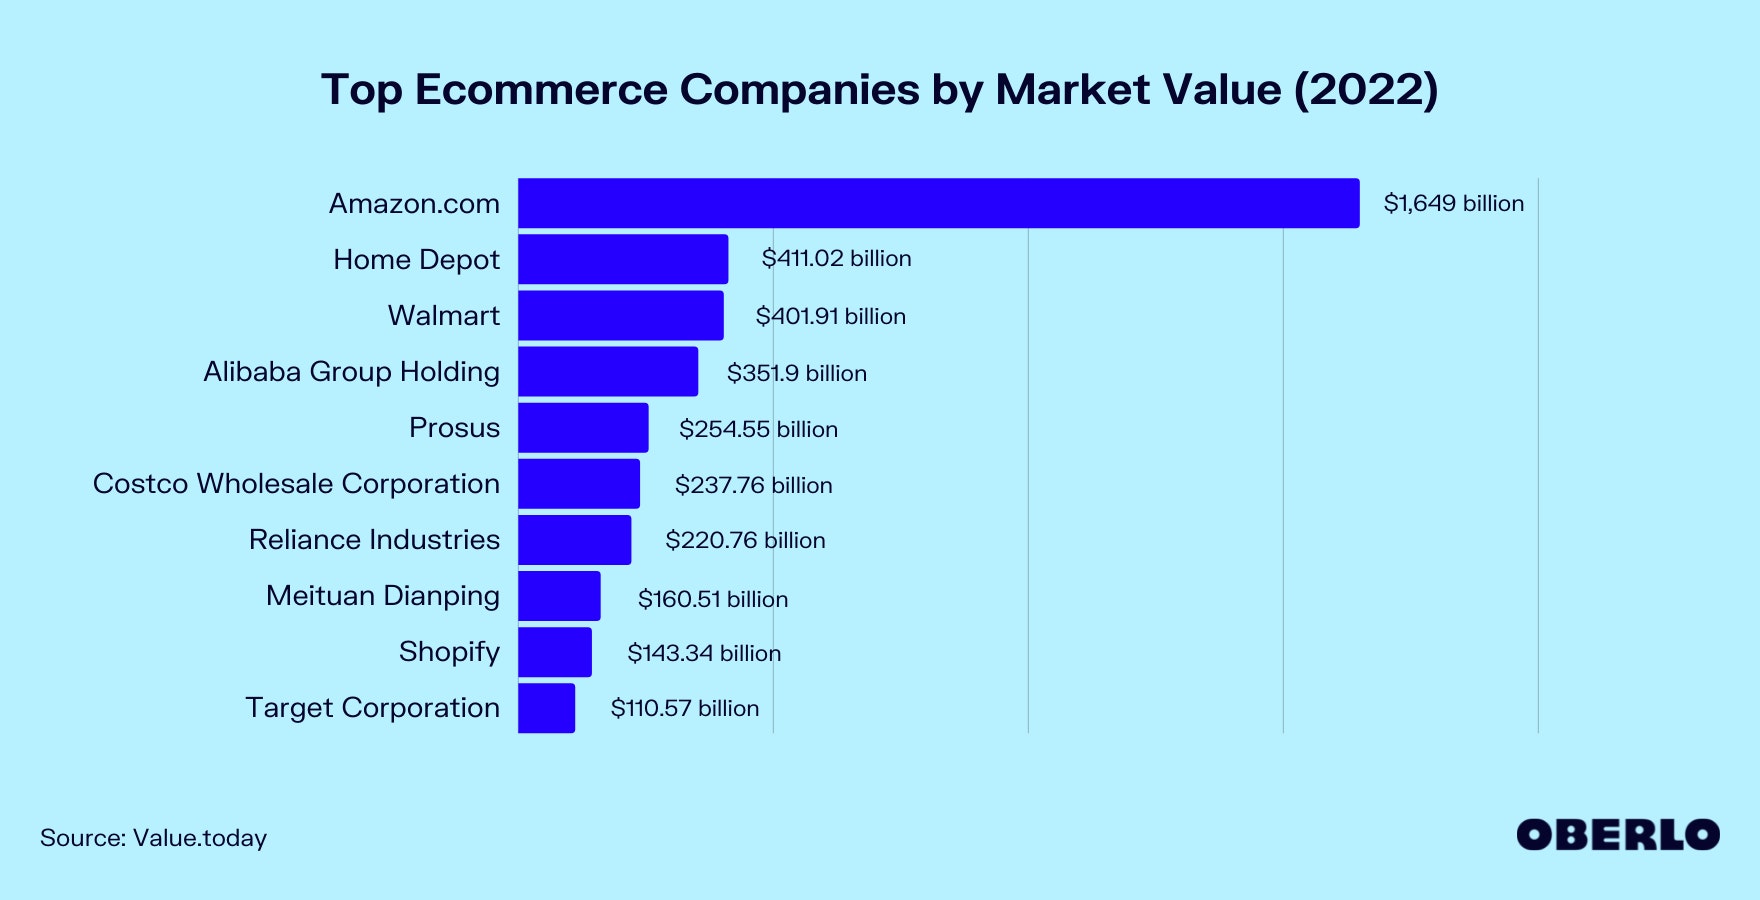 Chart of Top Ecommerce Companies in 2022